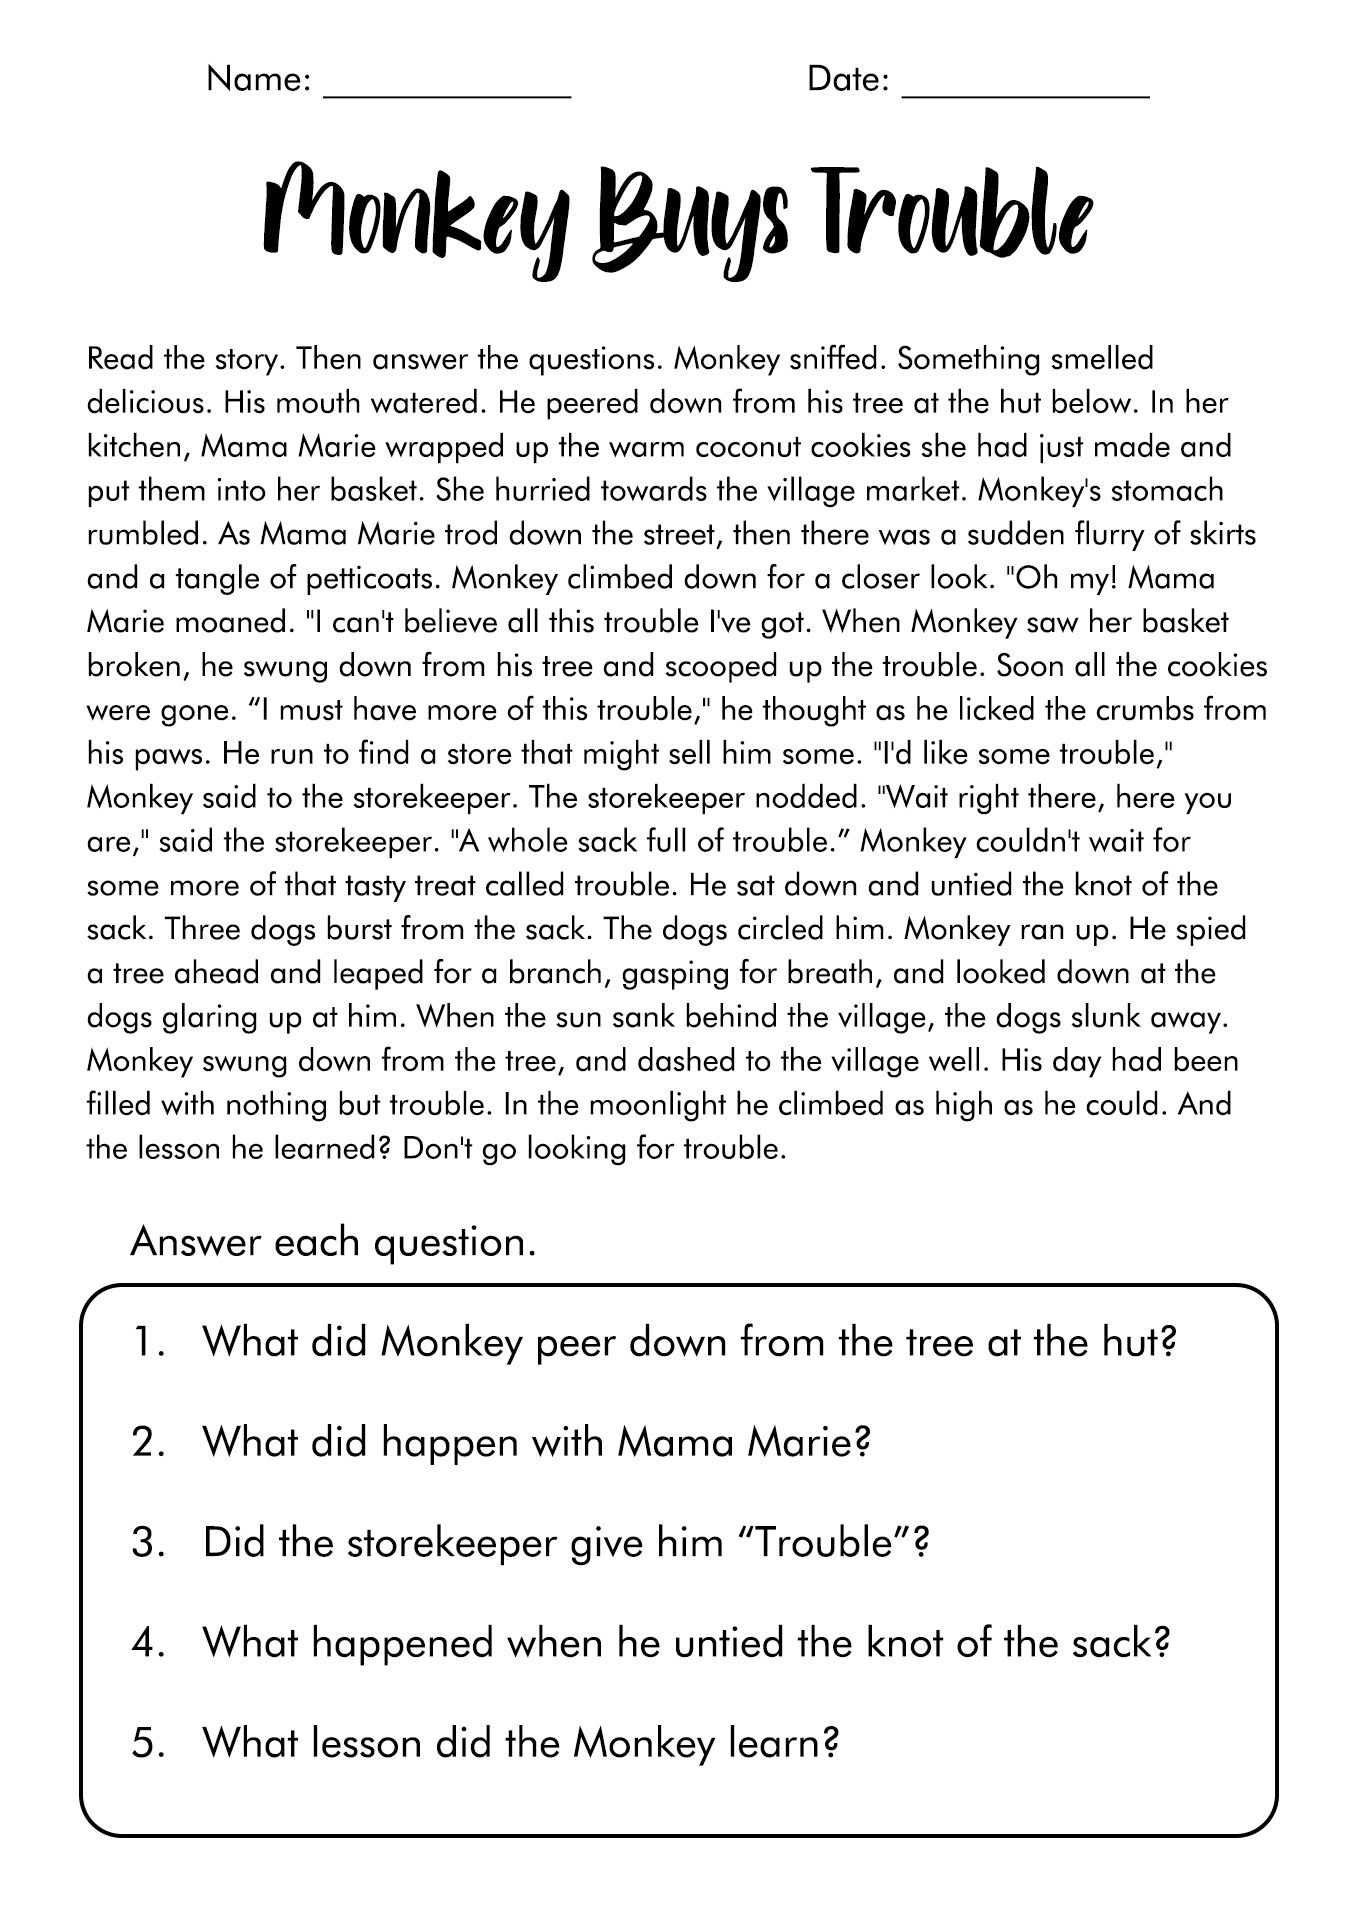 17-best-images-of-reading-response-worksheets-4th-grade-free-printable-reading-response